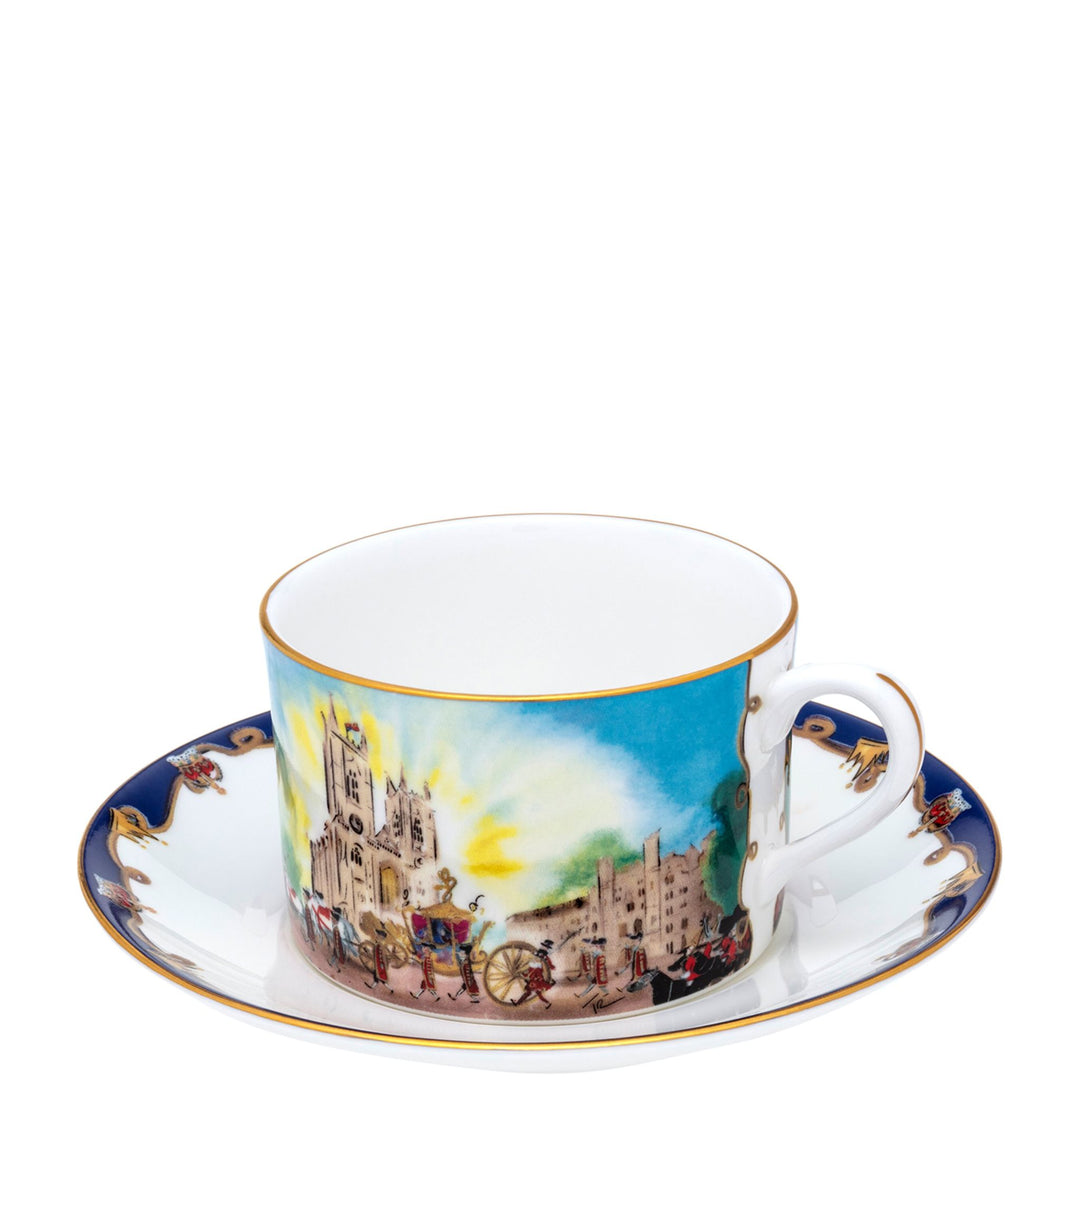 Coronation at Westminster Abbey Bone China Teacup & Saucer